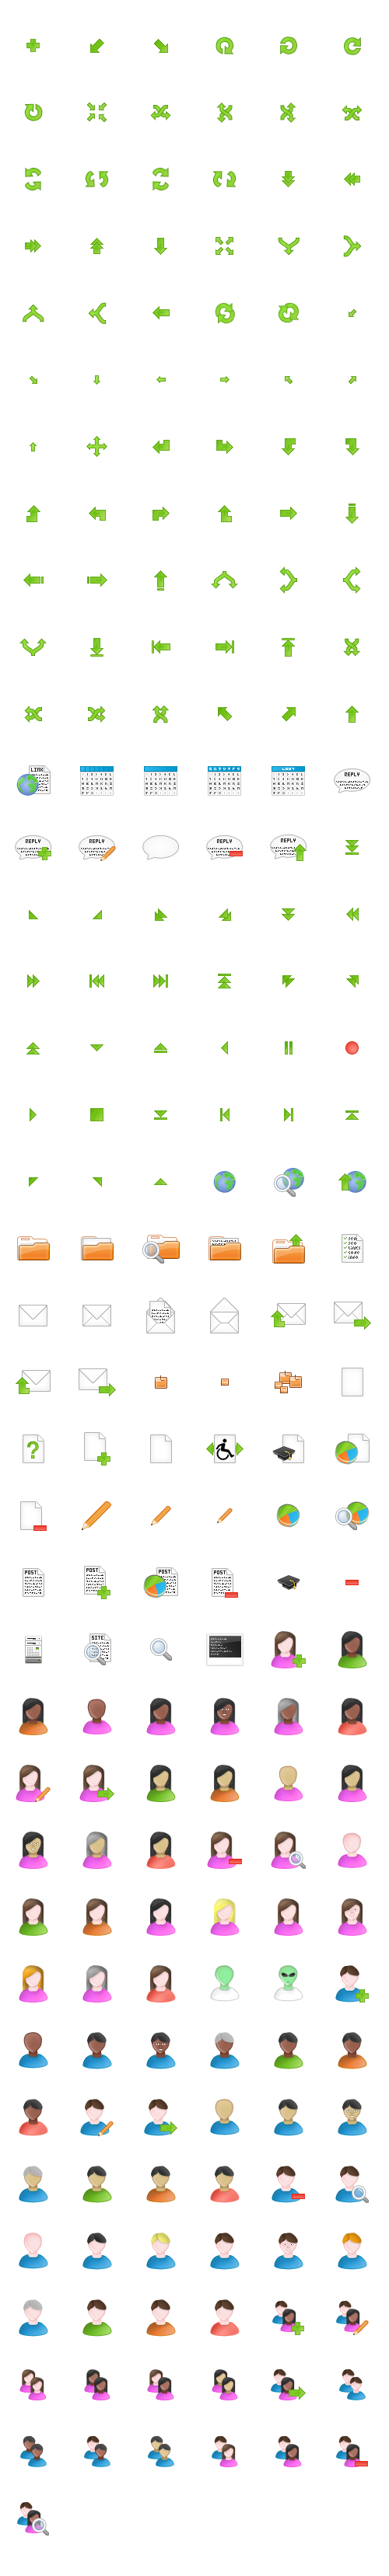 sem_labs_icon_pack02